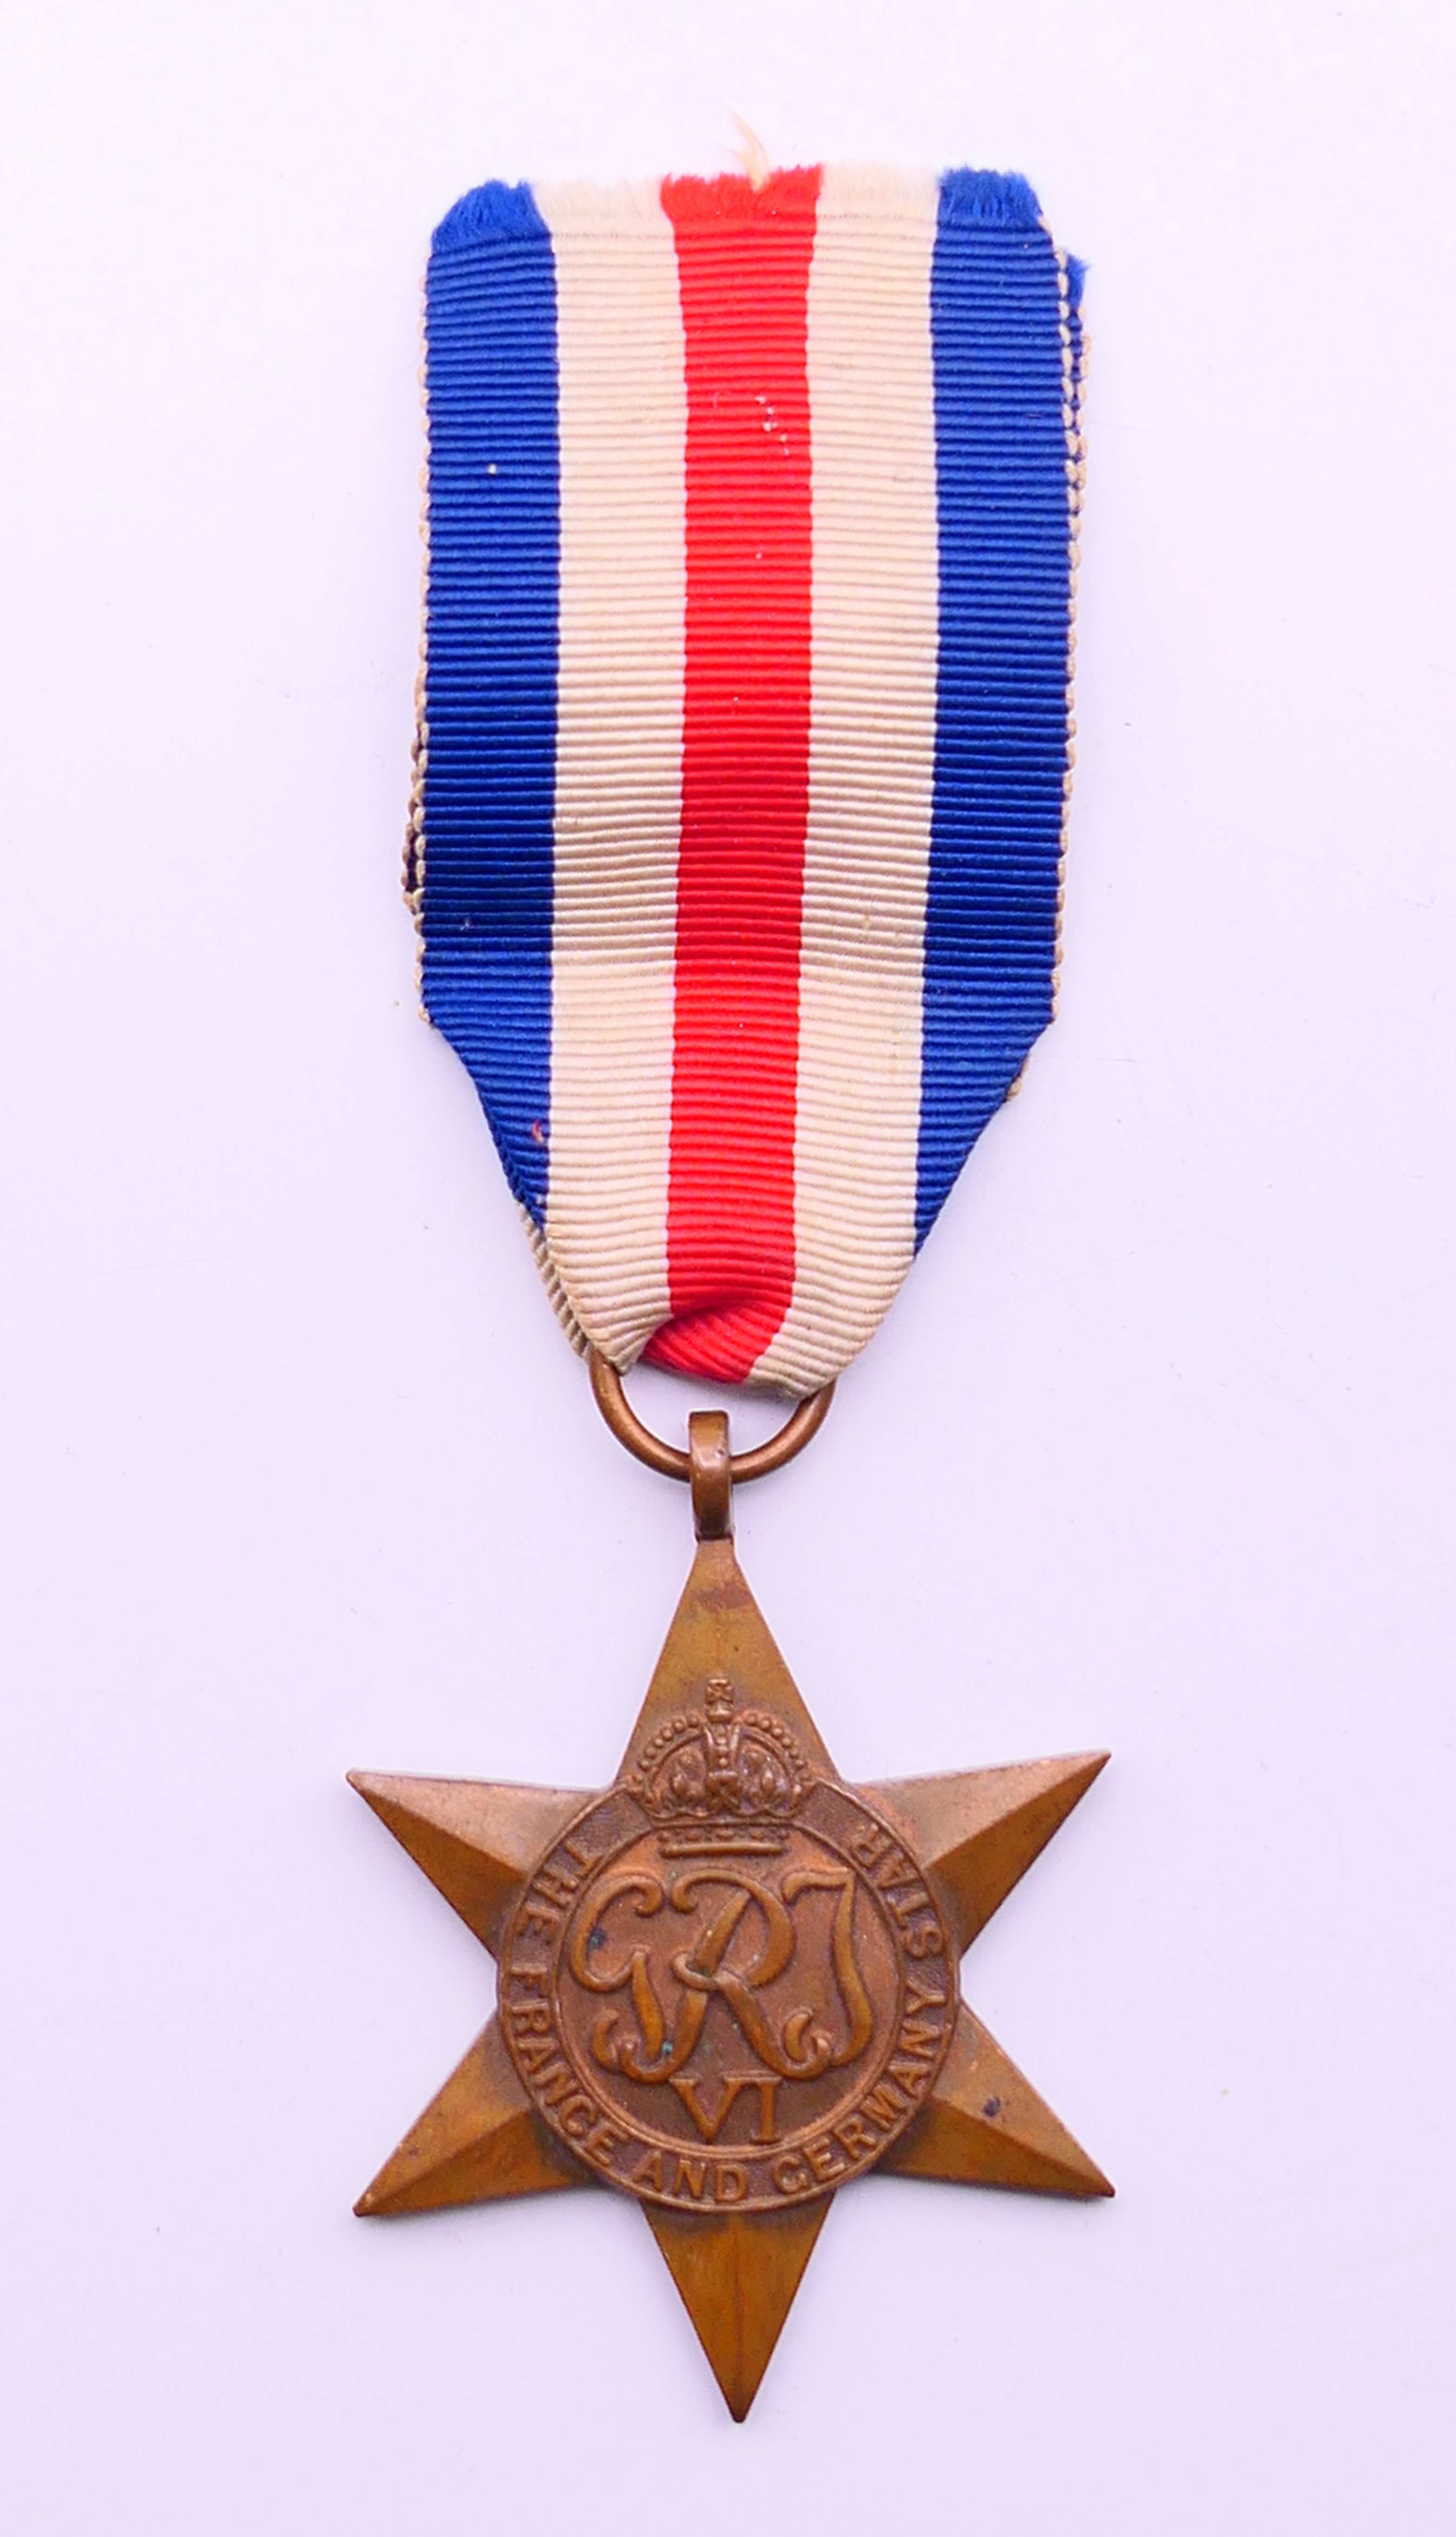 Two George IV medals (1939-45 Star and The France and Germany Star), - Image 5 of 9